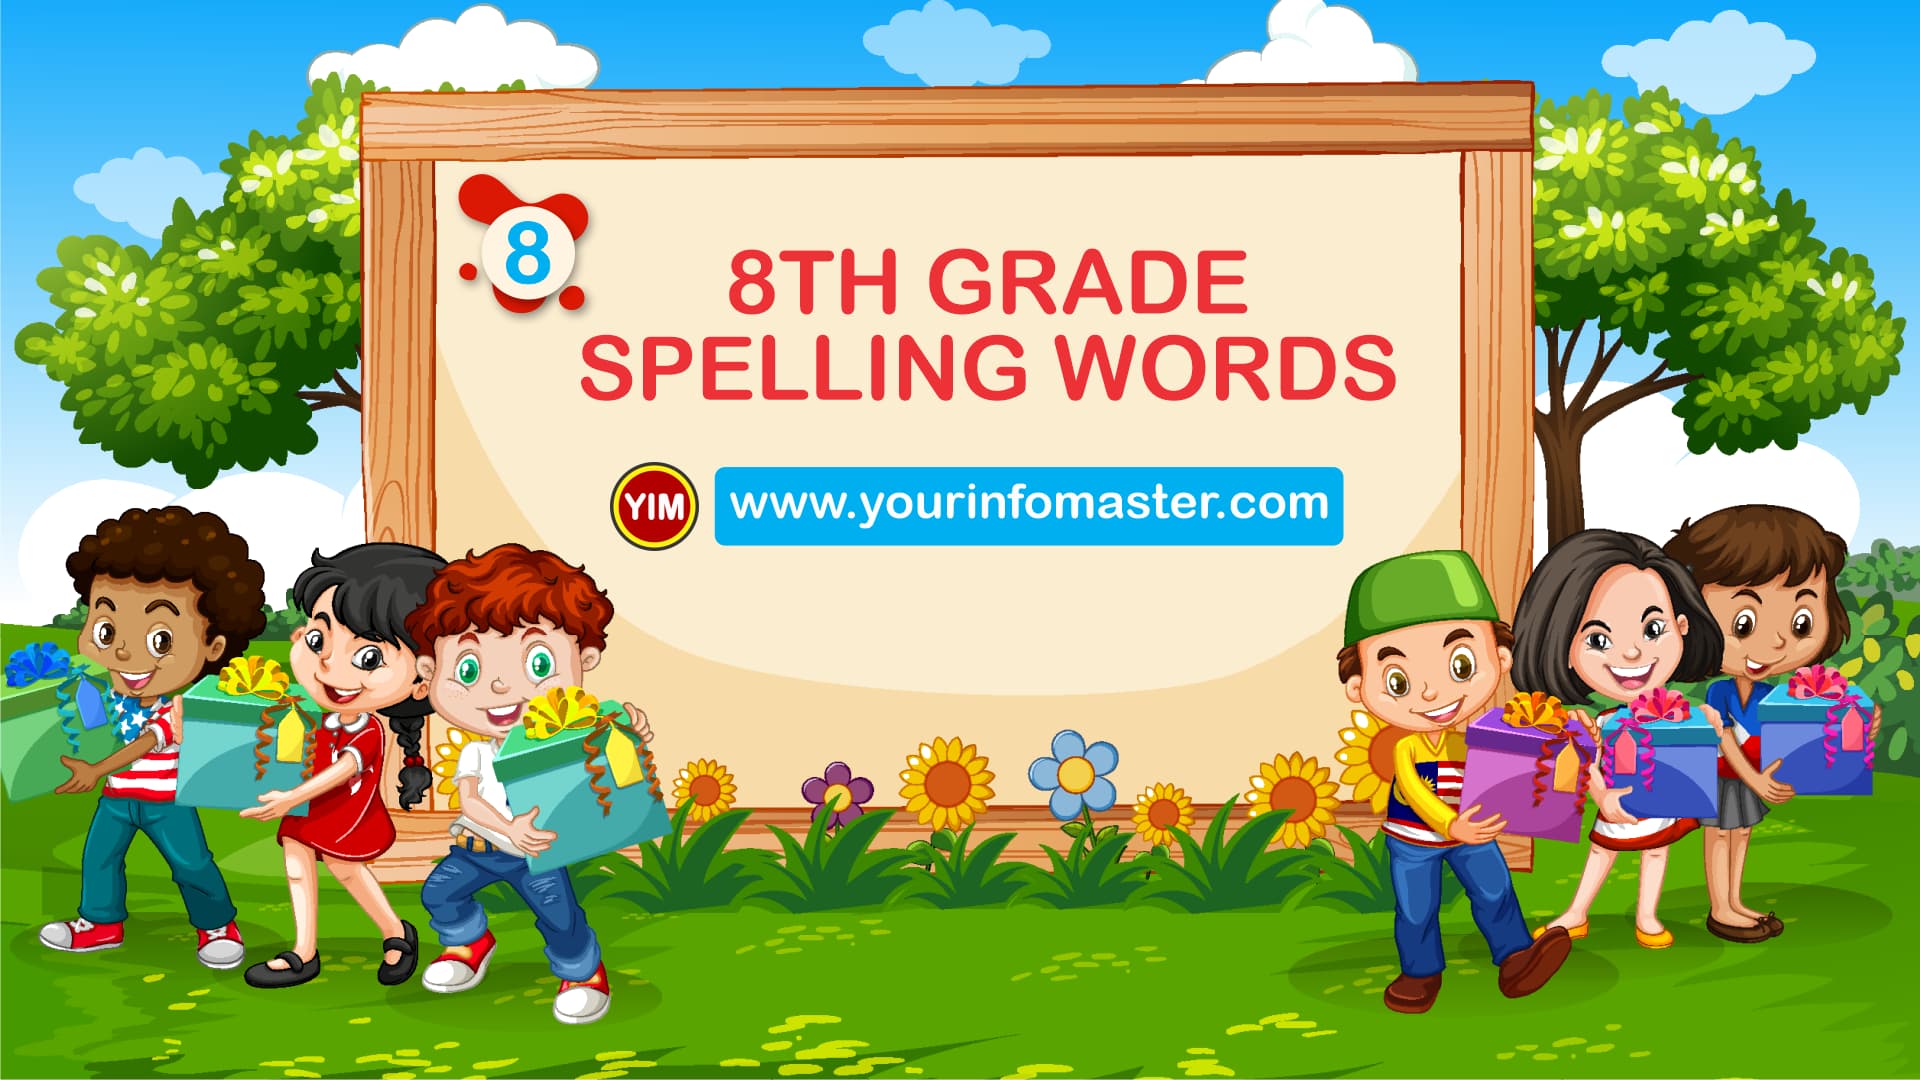 8th grade, 8th grade spelling bee words, 8th grade spelling words, 8th Grade Spelling Words list pdf, awesome words, cool words, eighth grade vocabulary words, examples of 8th Grade Spelling Words, grade 8 spelling words, Learning Spellings, spelling words for 8th grade, vocabulary words, word of the day for kids, Words Bank, Words Worksheets